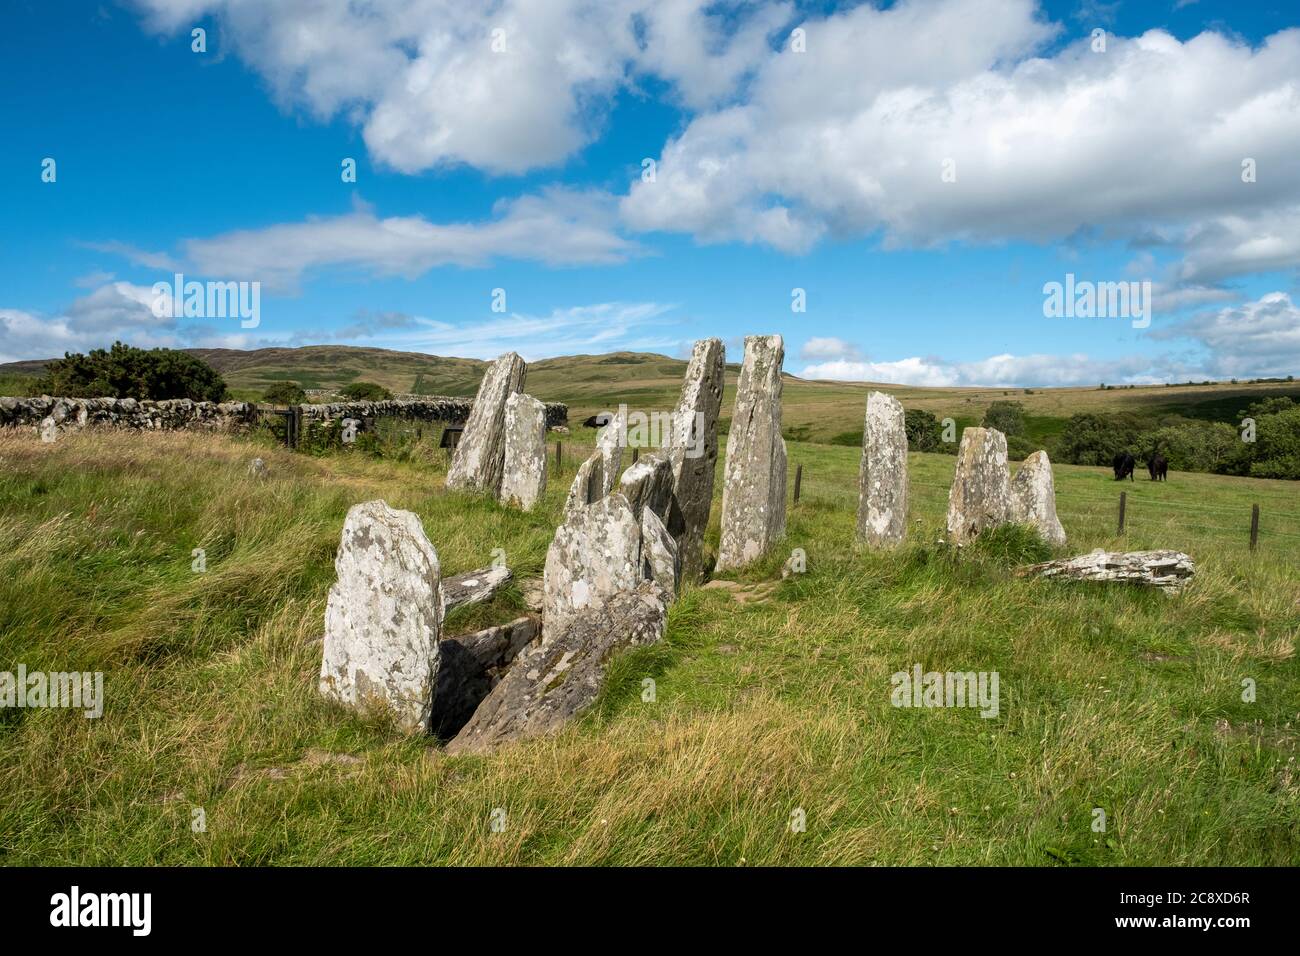 Cairn Holy 1 Standing Stones and Burial Chamber site near Carsluith, Newton Stewart, Dumfries and Galloway, Scotland. Stock Photo